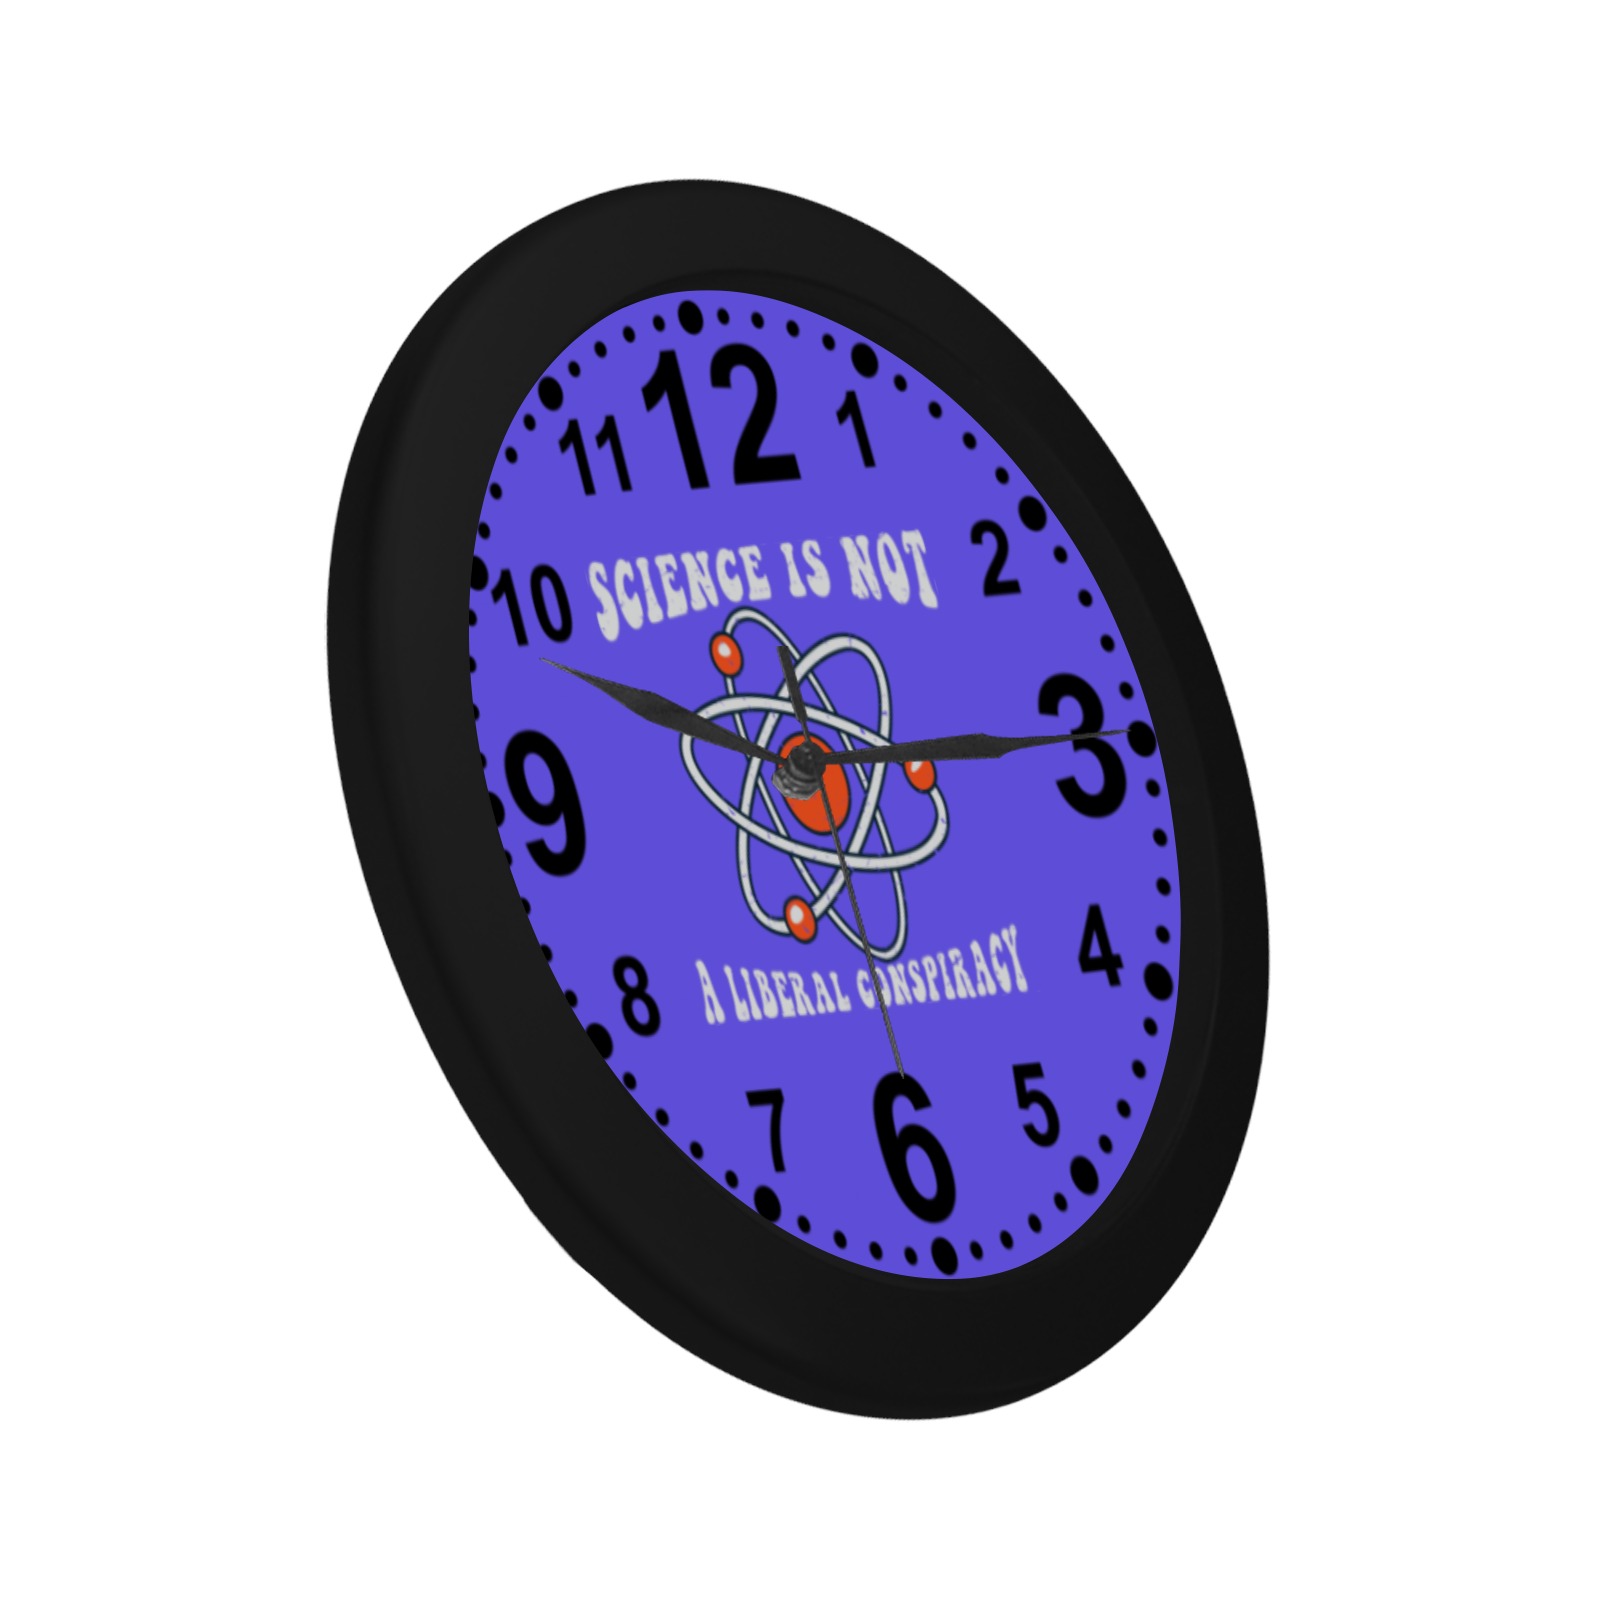 Science In Not A Liberal Conspiracy Circular Plastic Wall clock